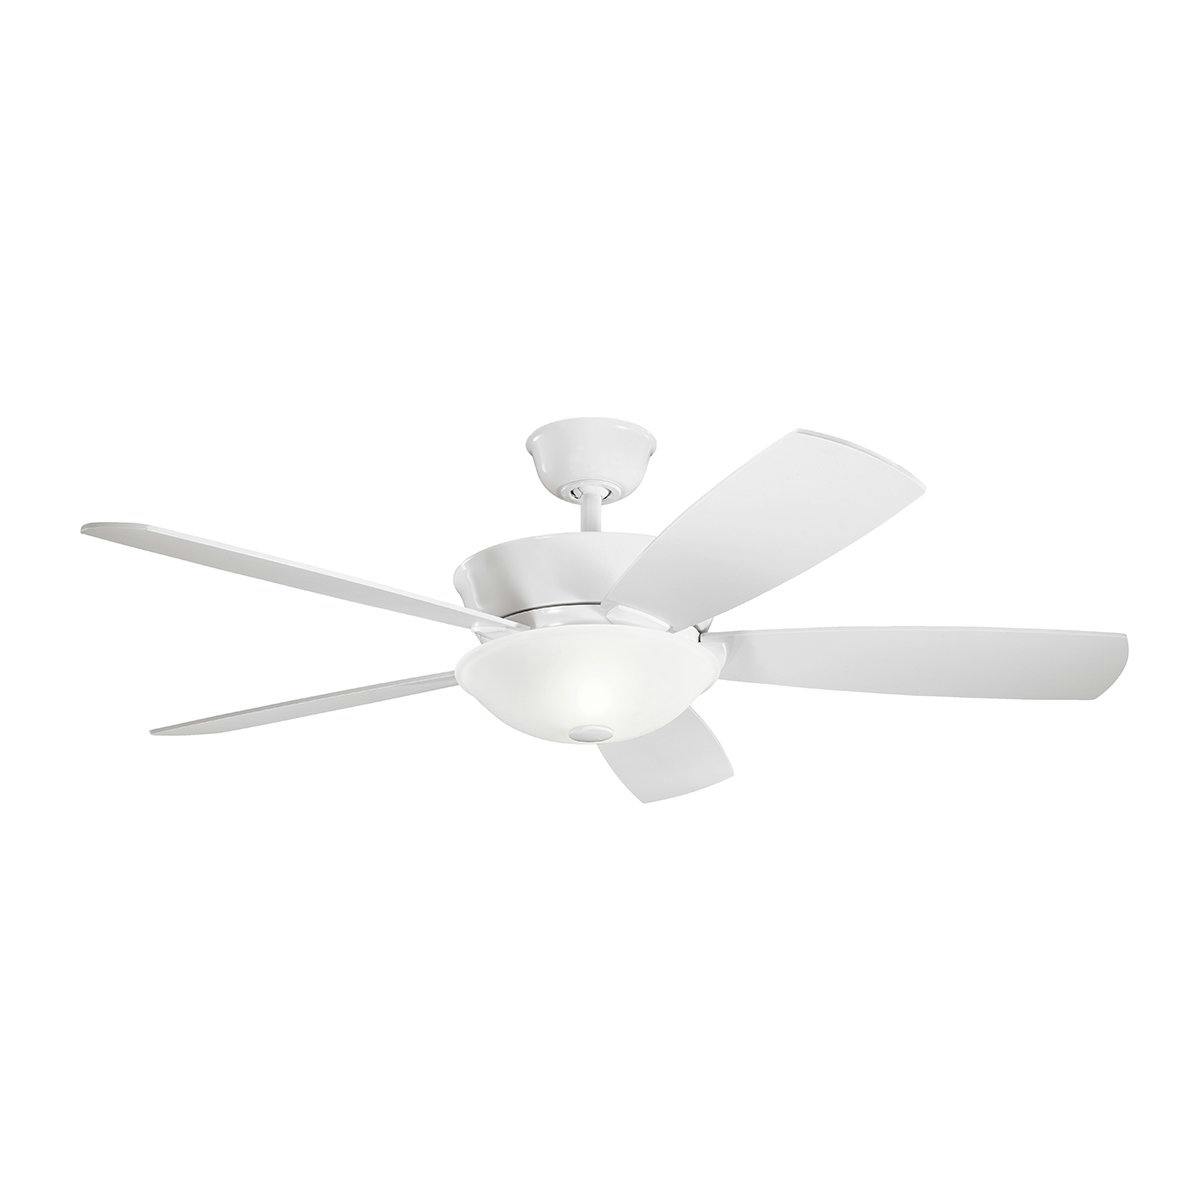 Skye LED 54" Ceiling Fan in White on a white background